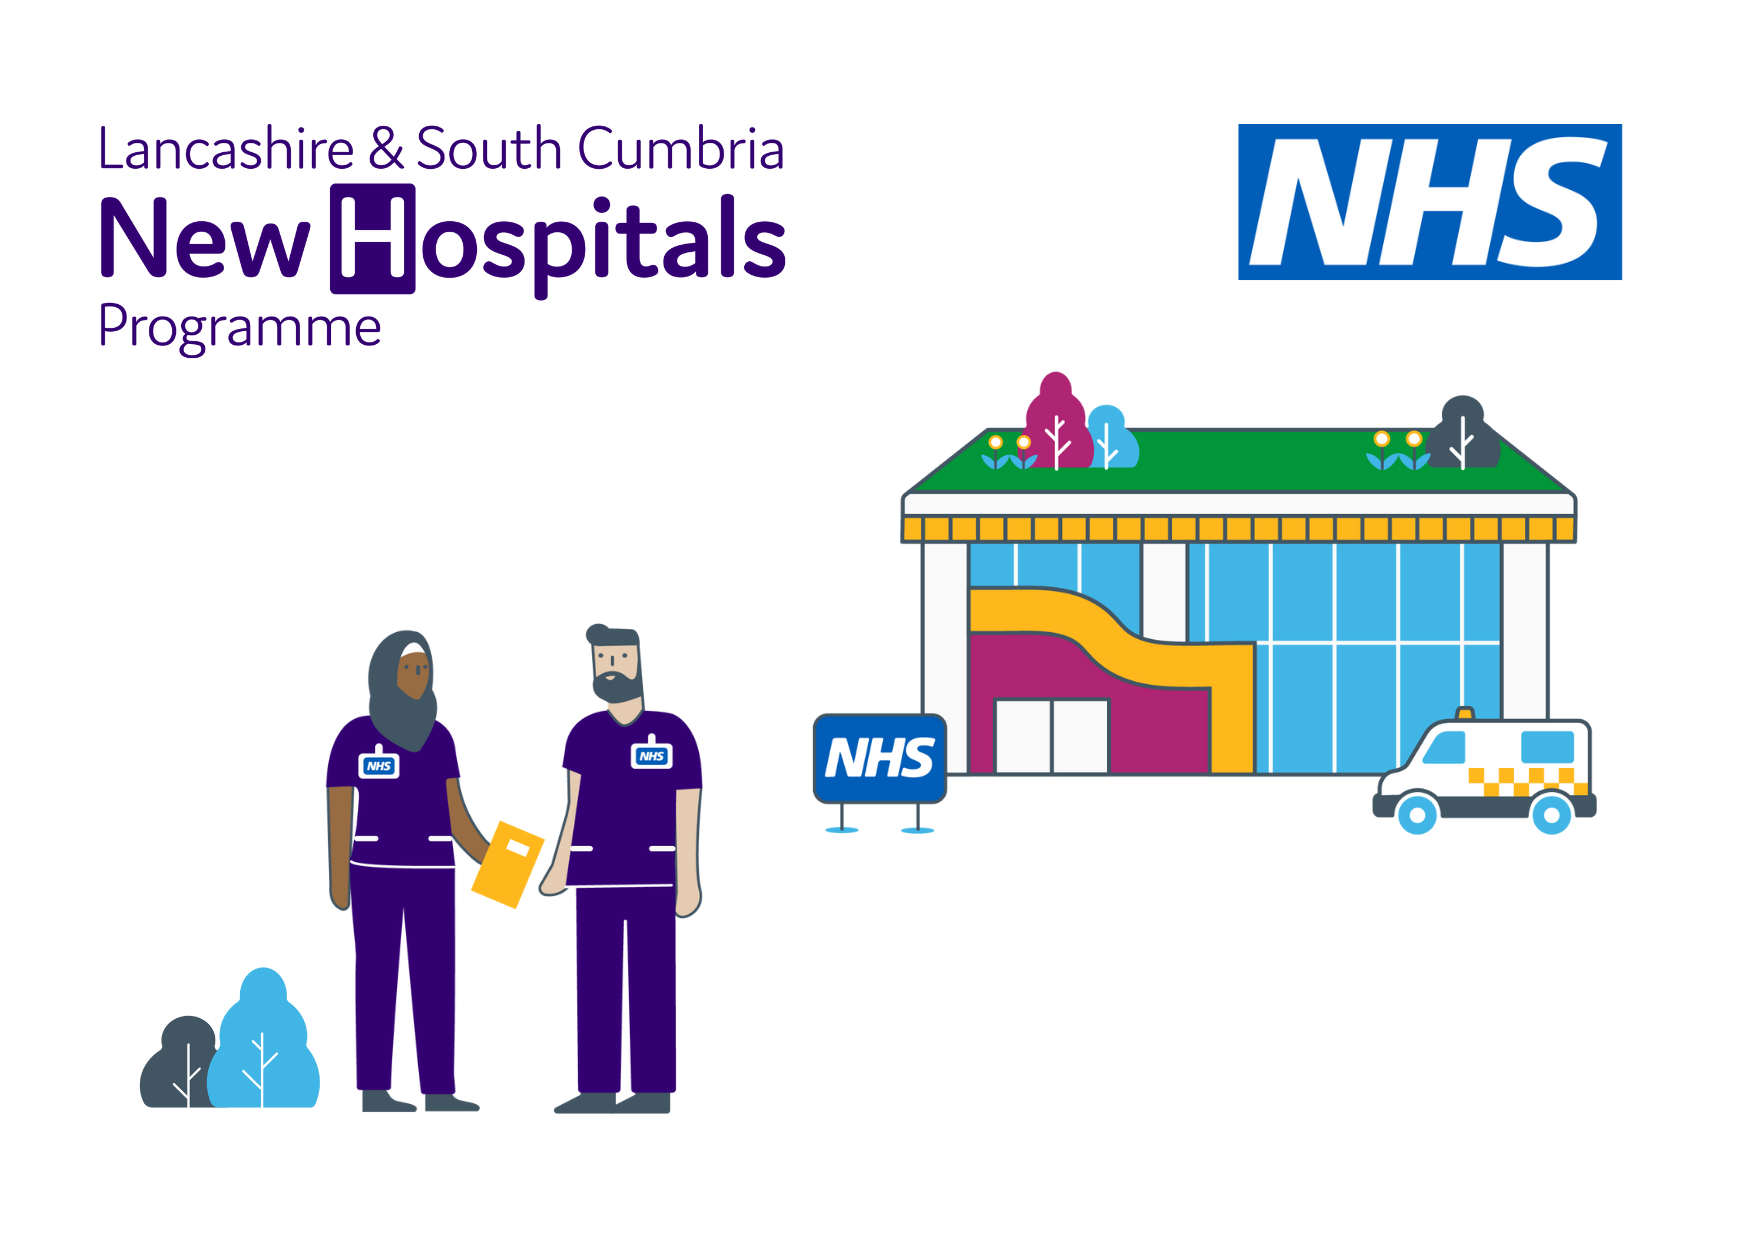 Lancashire and South Cumbria New Hospital Programme graphic